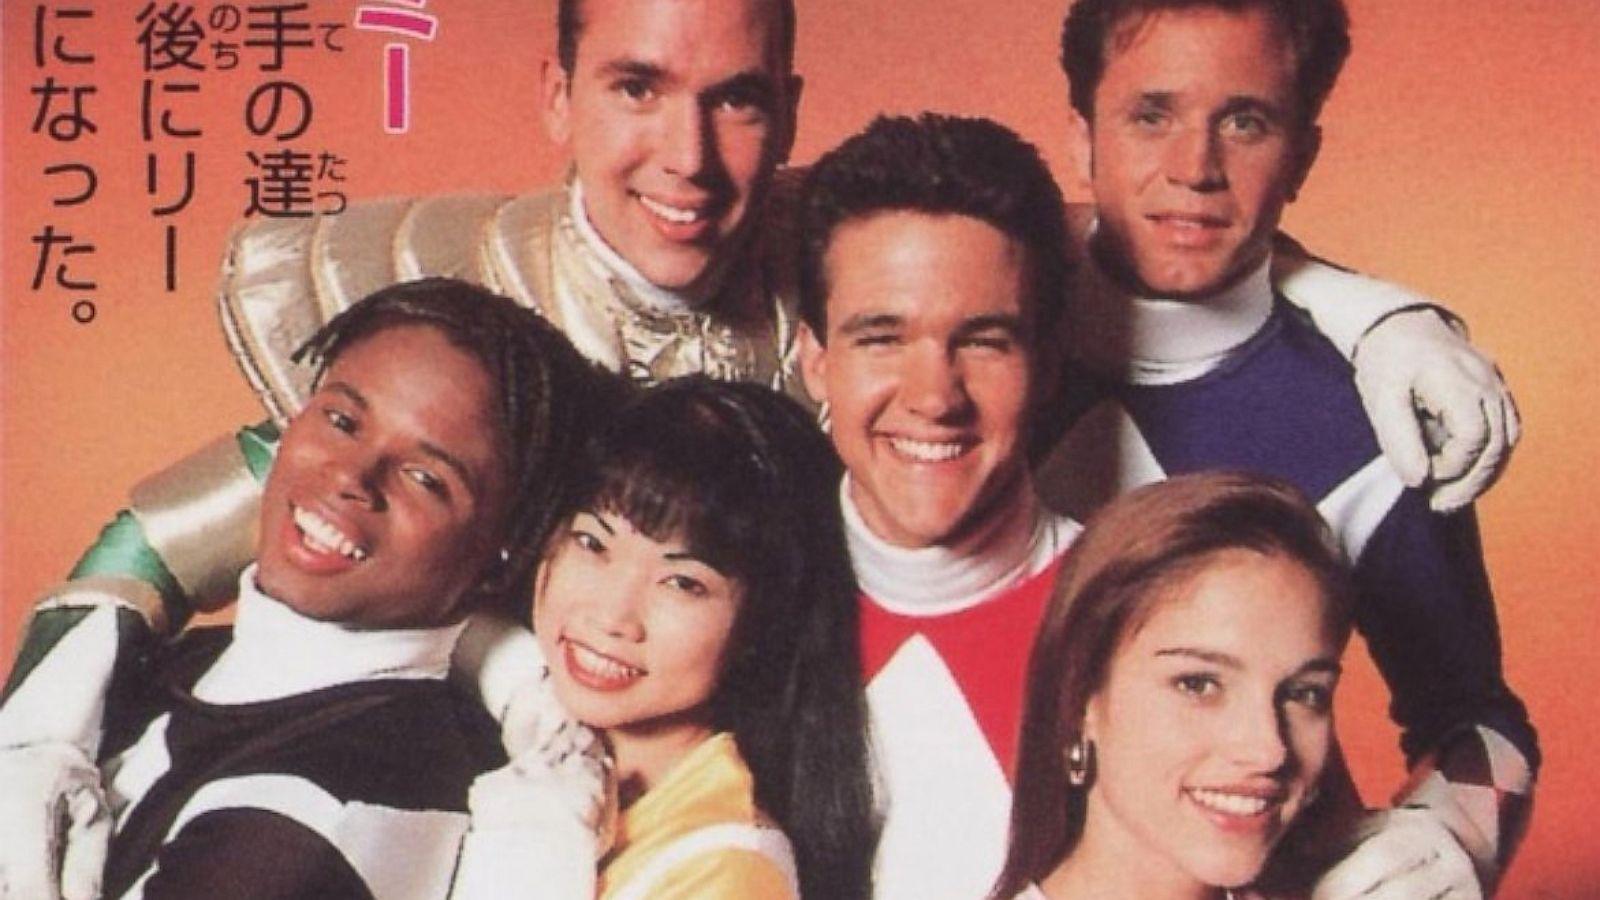 Things You Never Knew About the Original 'Power Rangers'